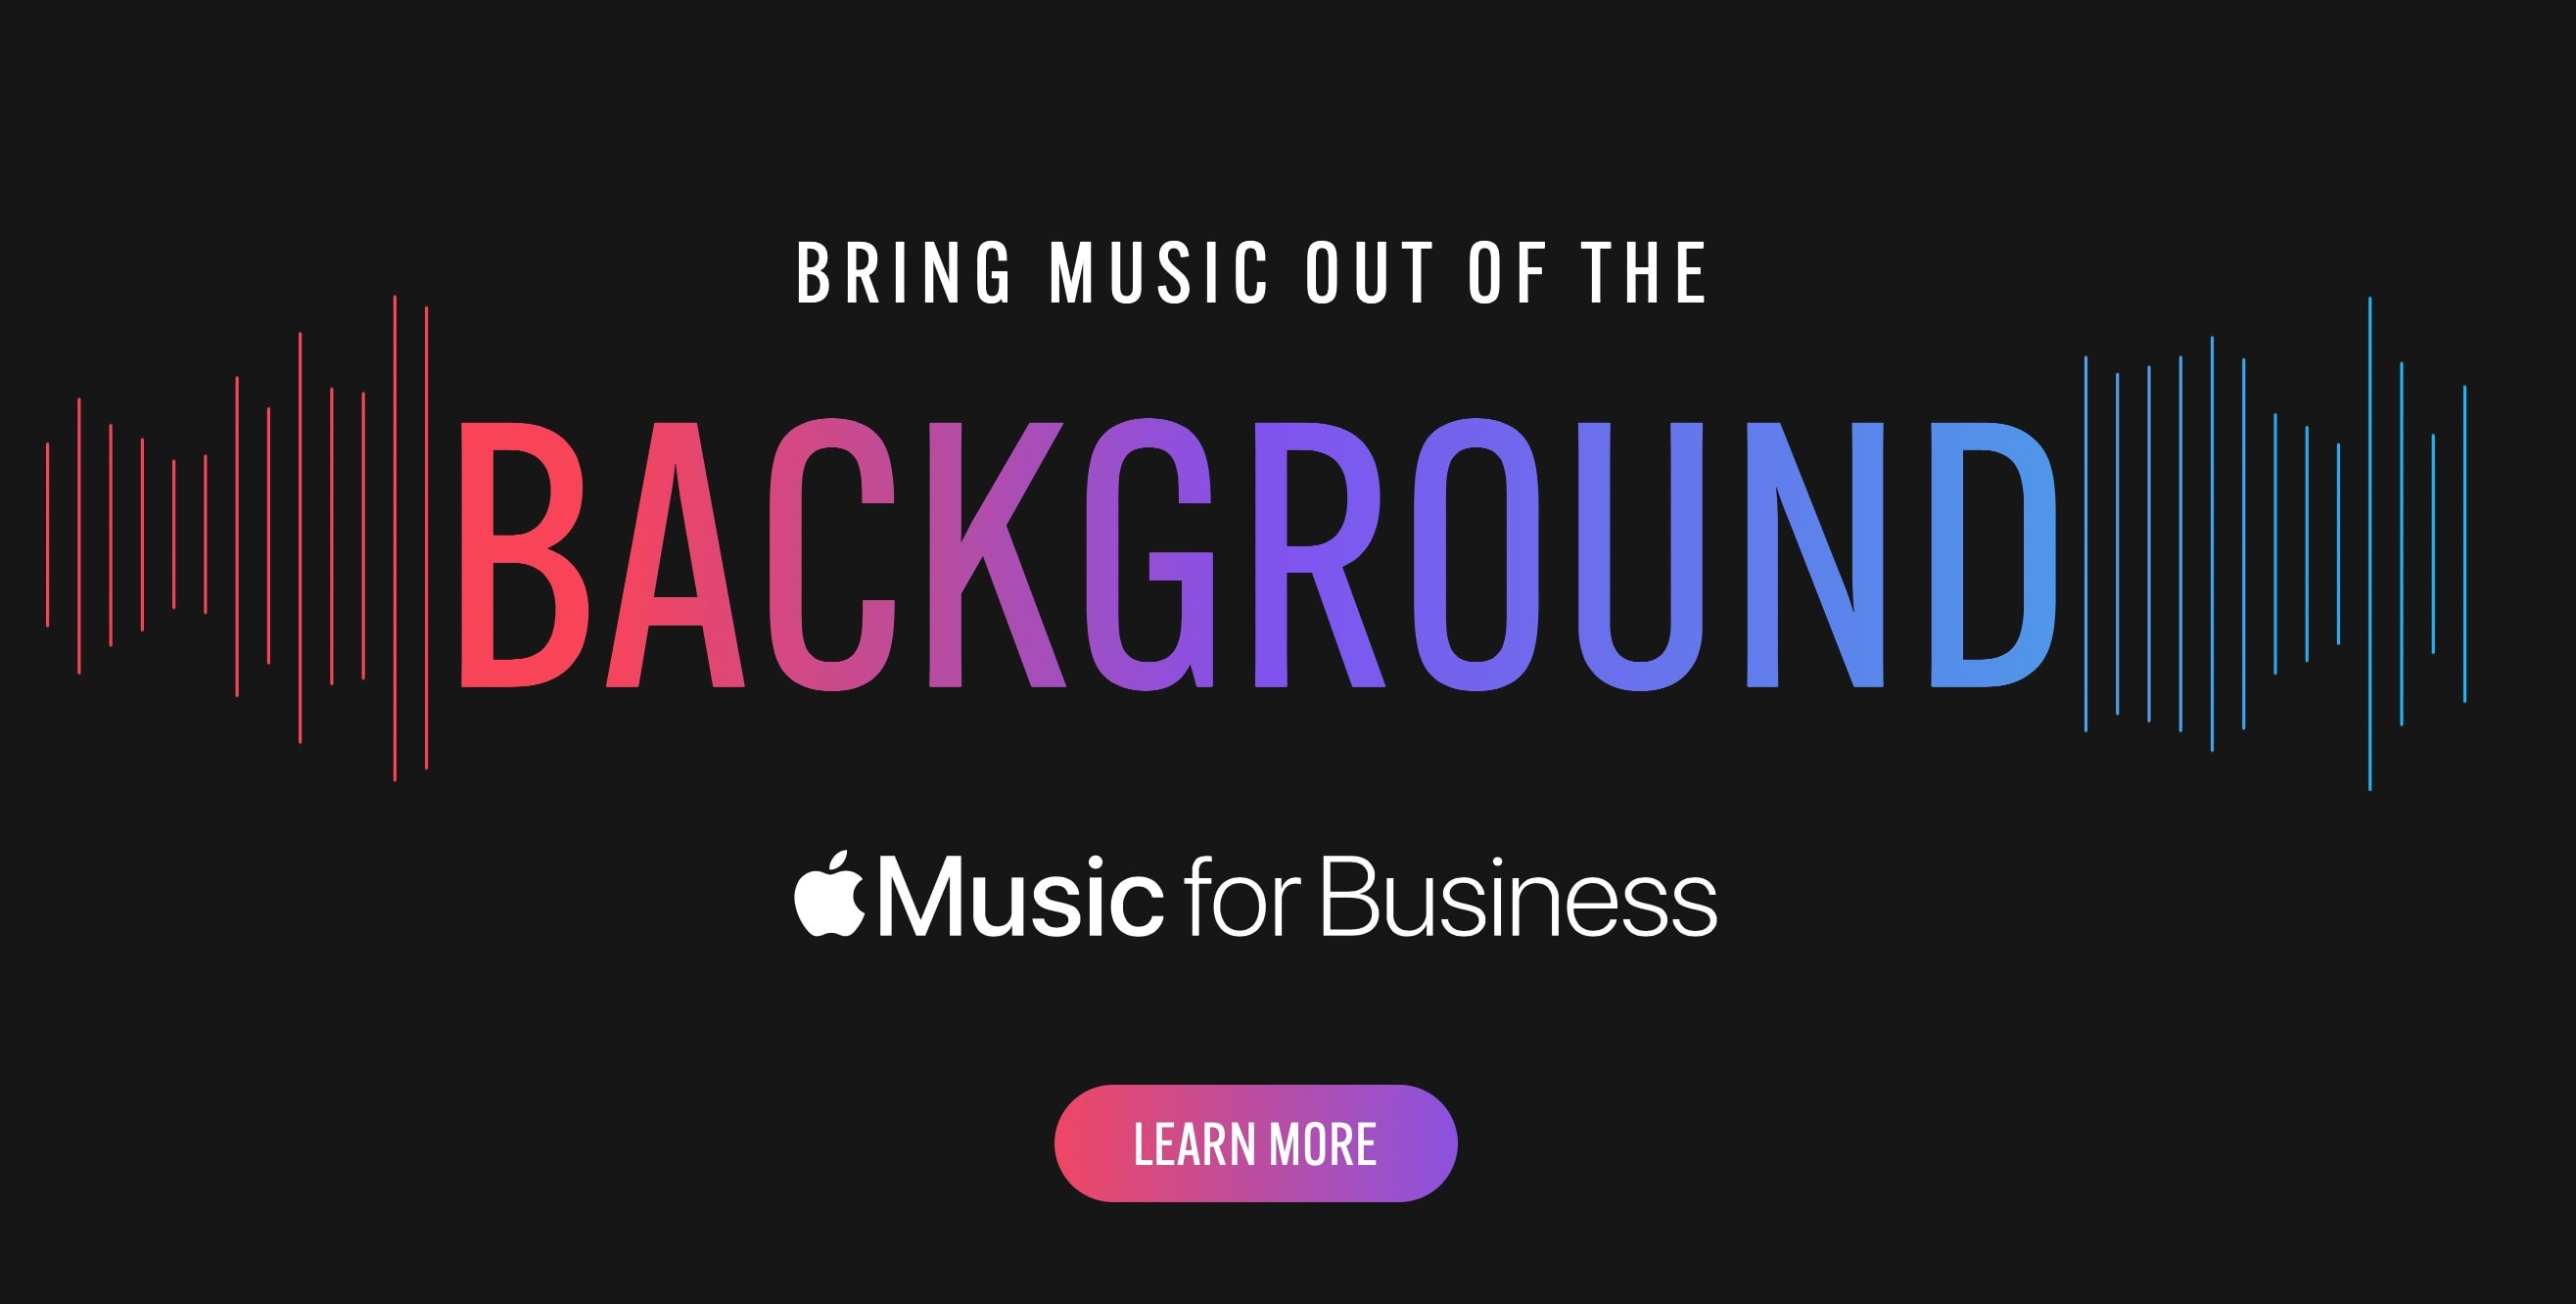 Apple Music For Business gives stores a legal way to stream Apple Music